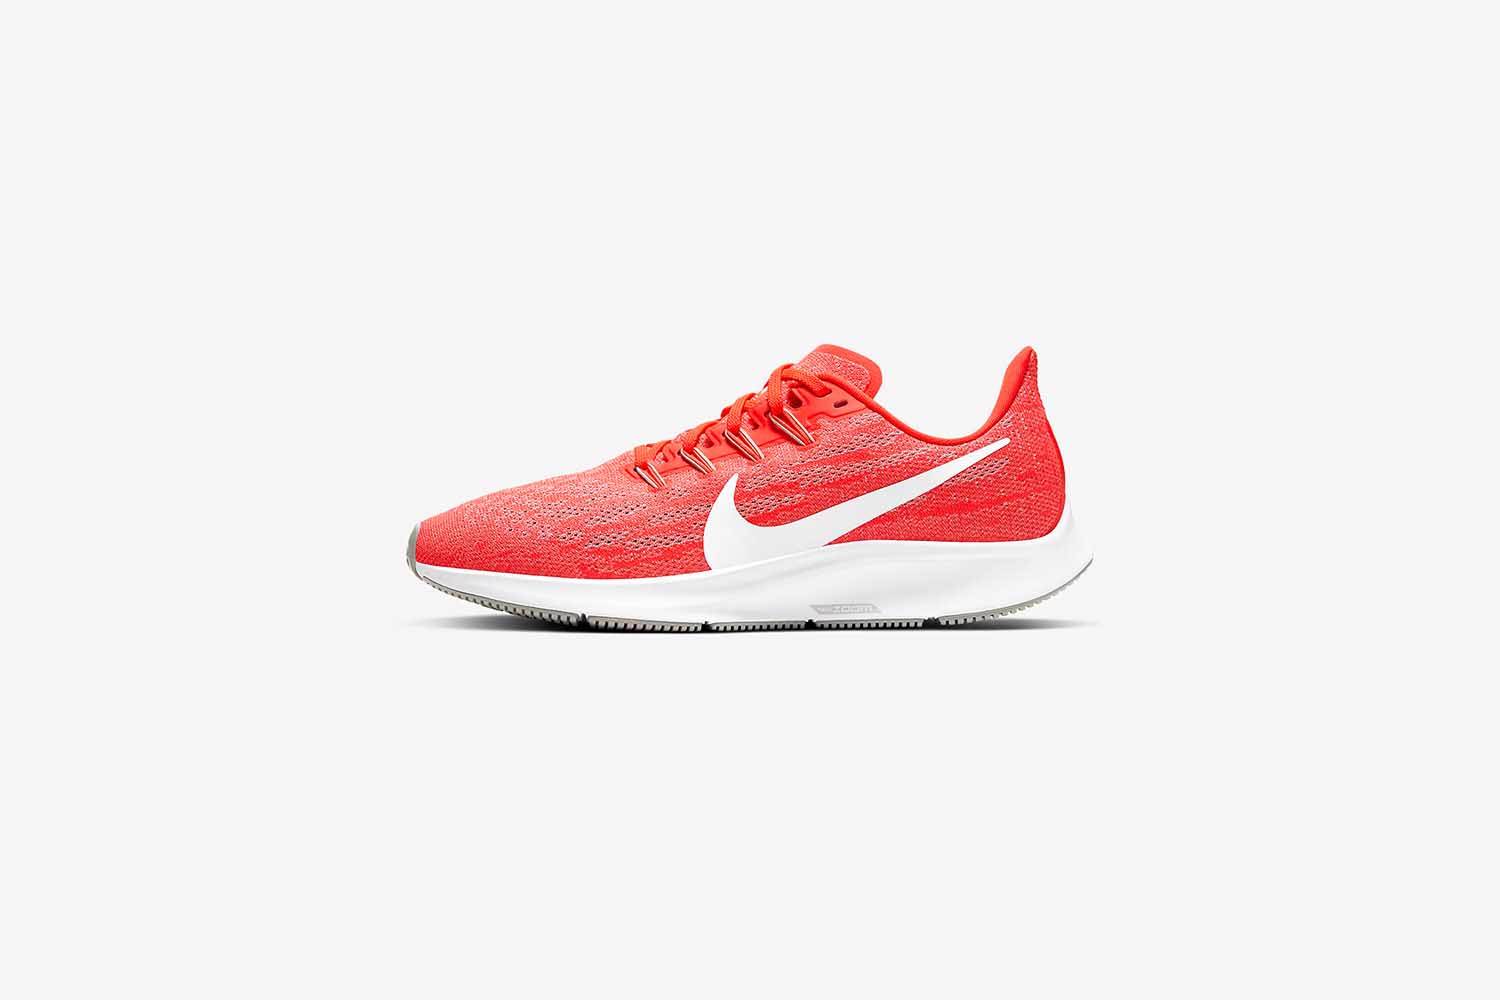 Deal: Take 25% Off One of Nike's Best-Selling Running Shoes - InsideHook